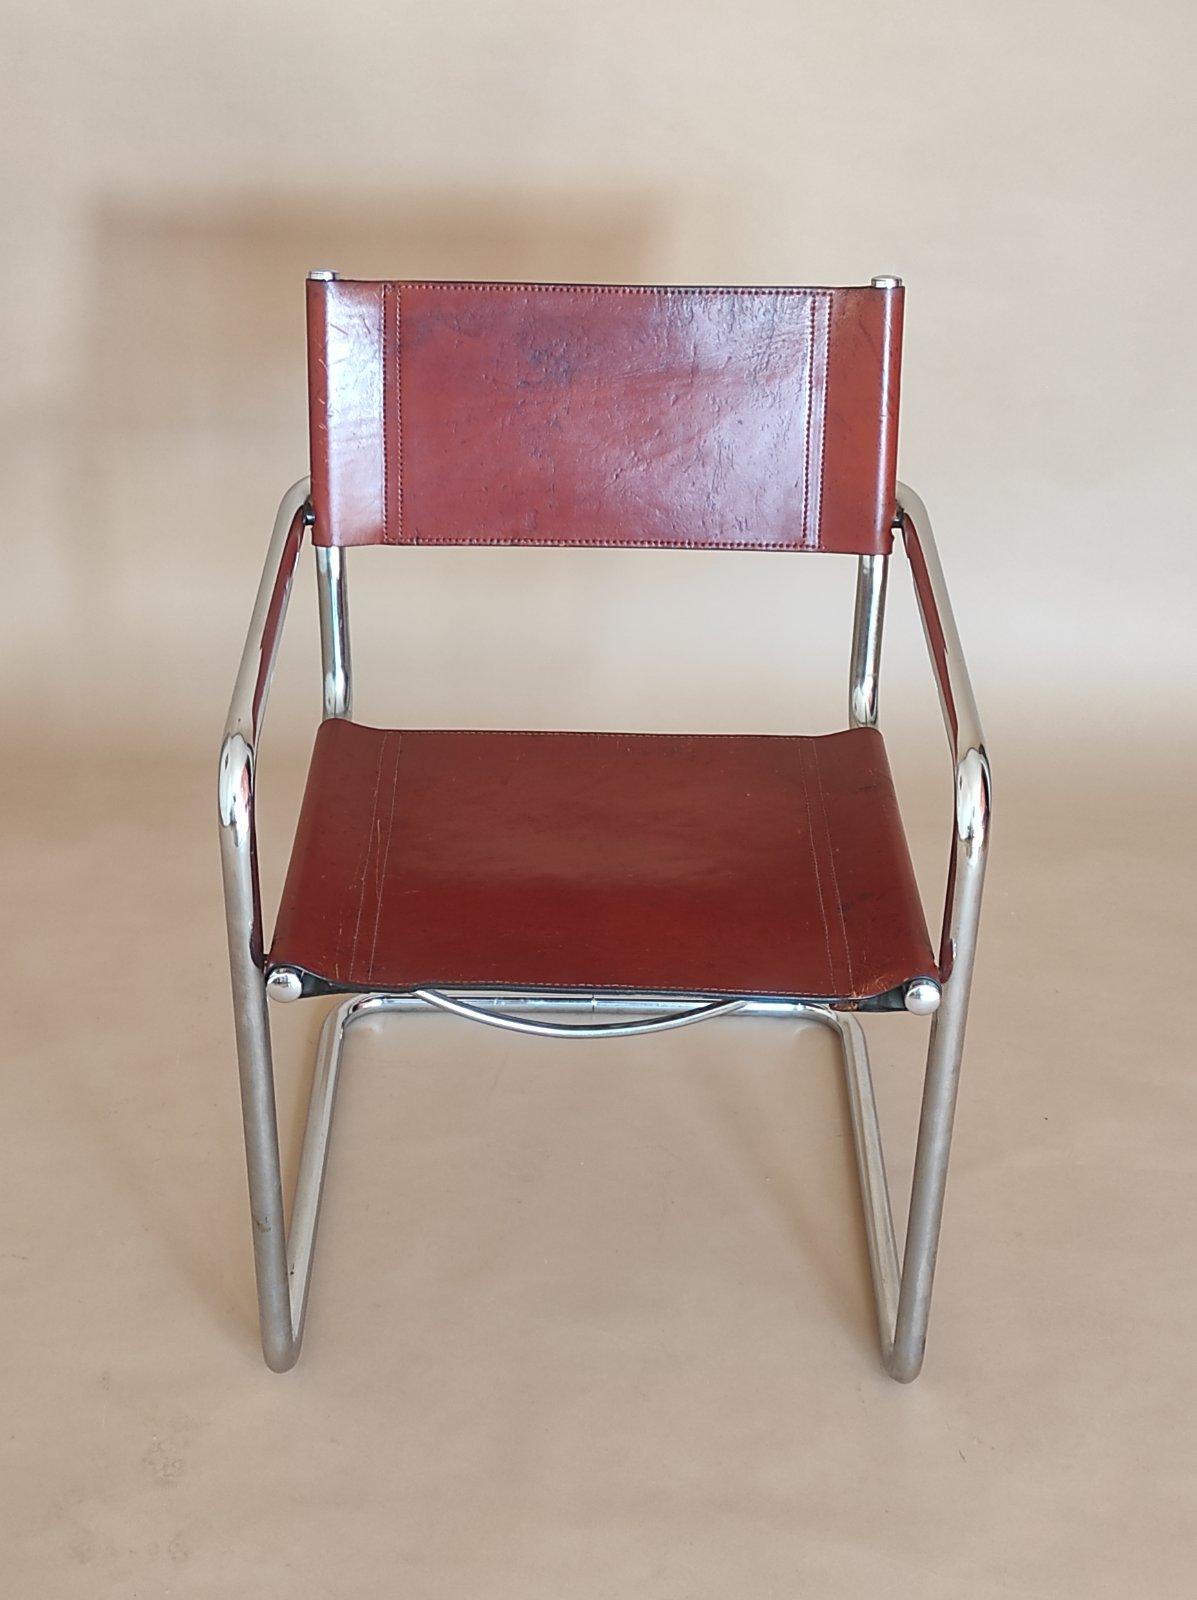 Titi Agnoli Cantilever Leather Chair for UNIFOR Italy 1970s For Sale 2